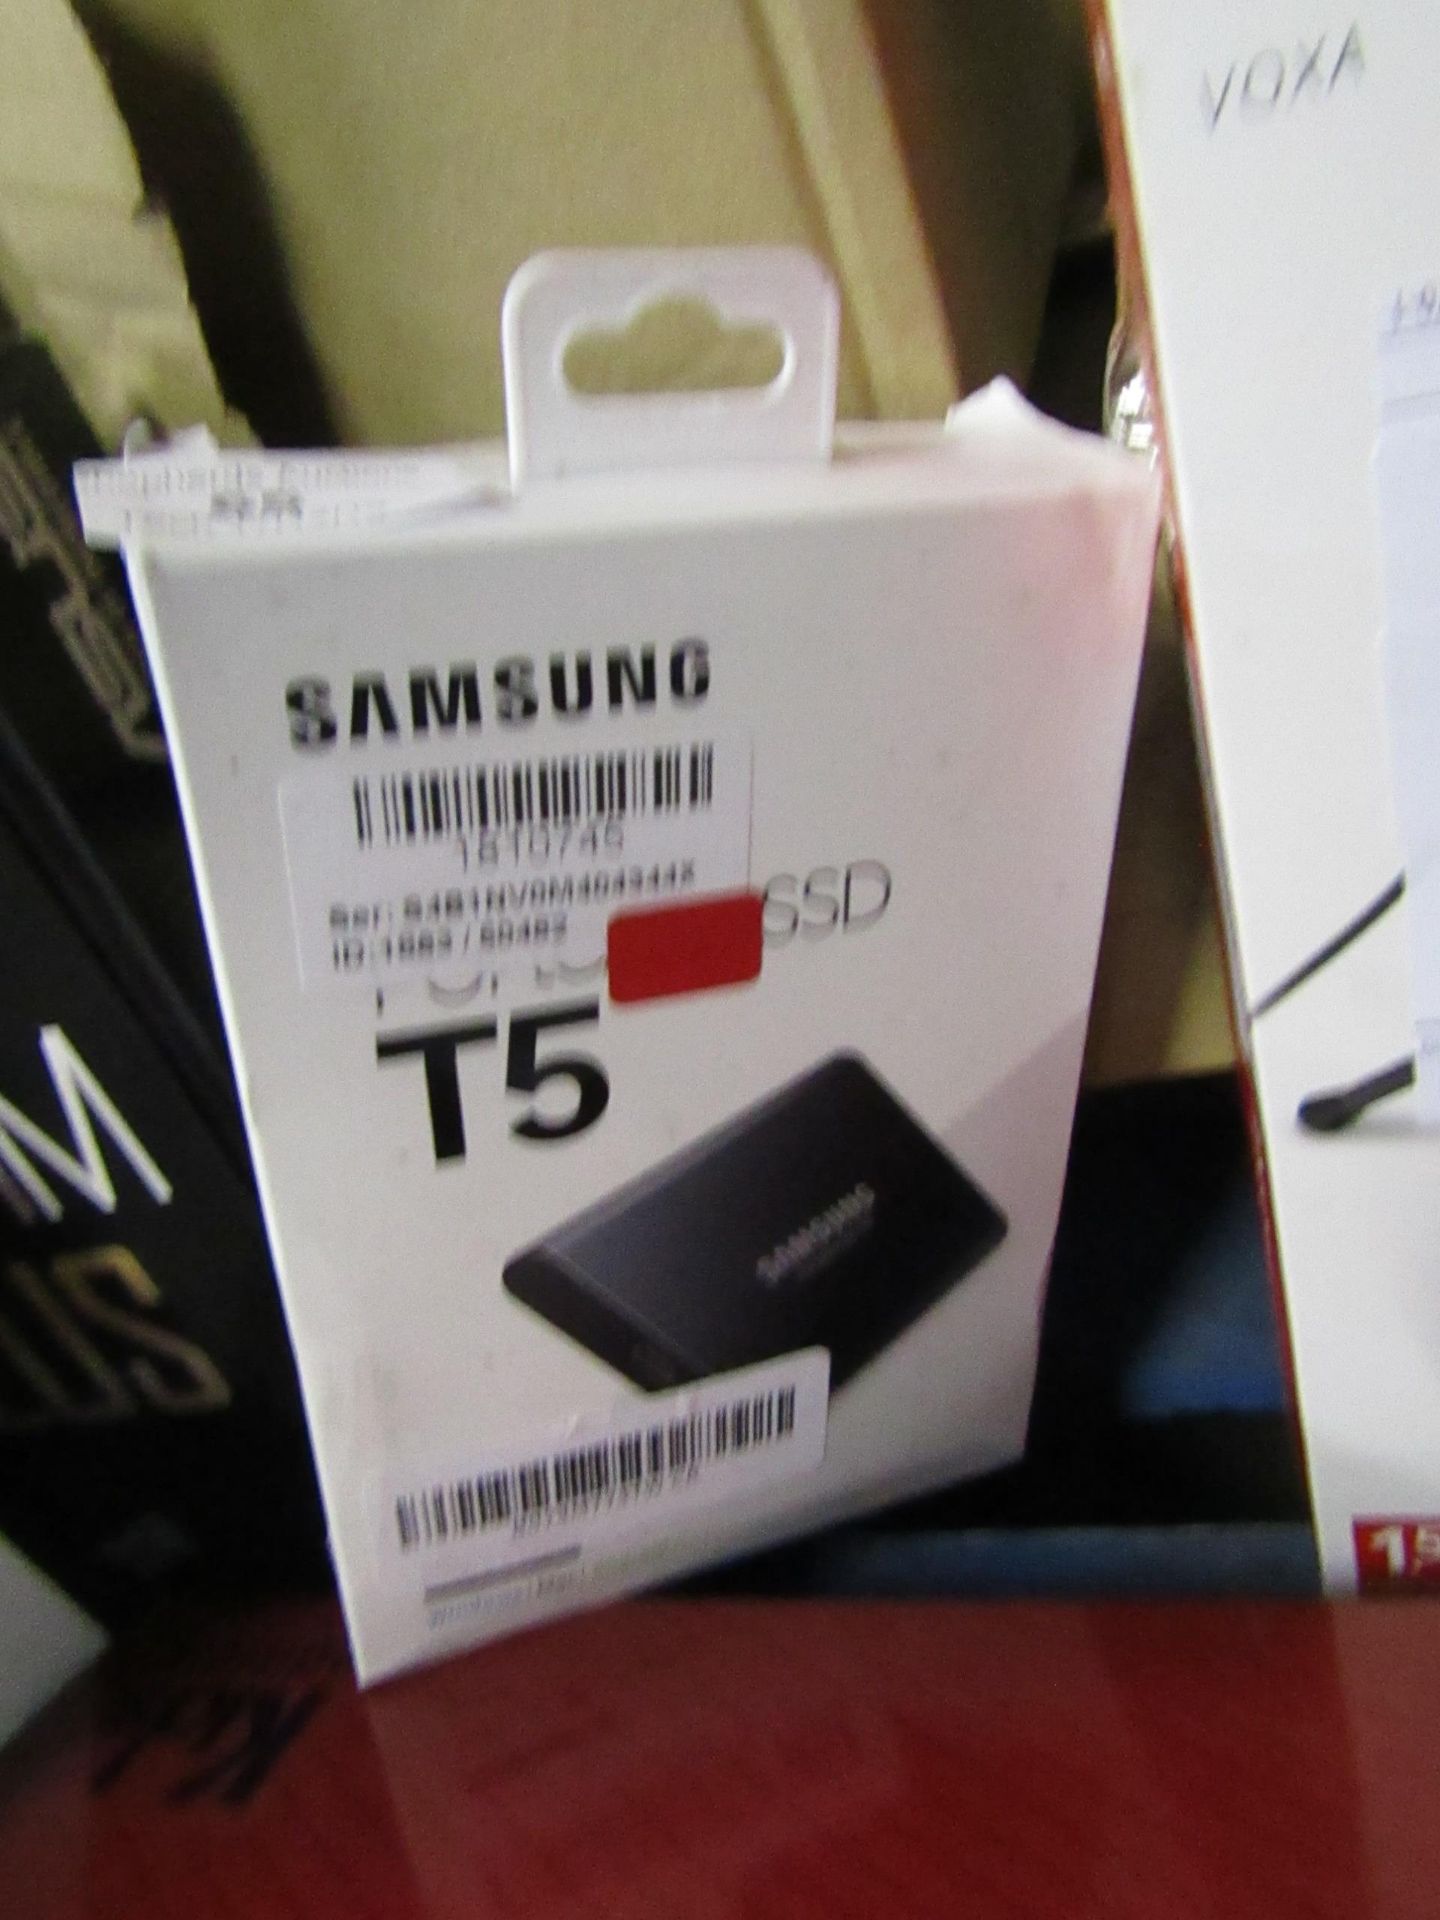 Samsung T5 1TB Portable SSD, boxed and unchecked